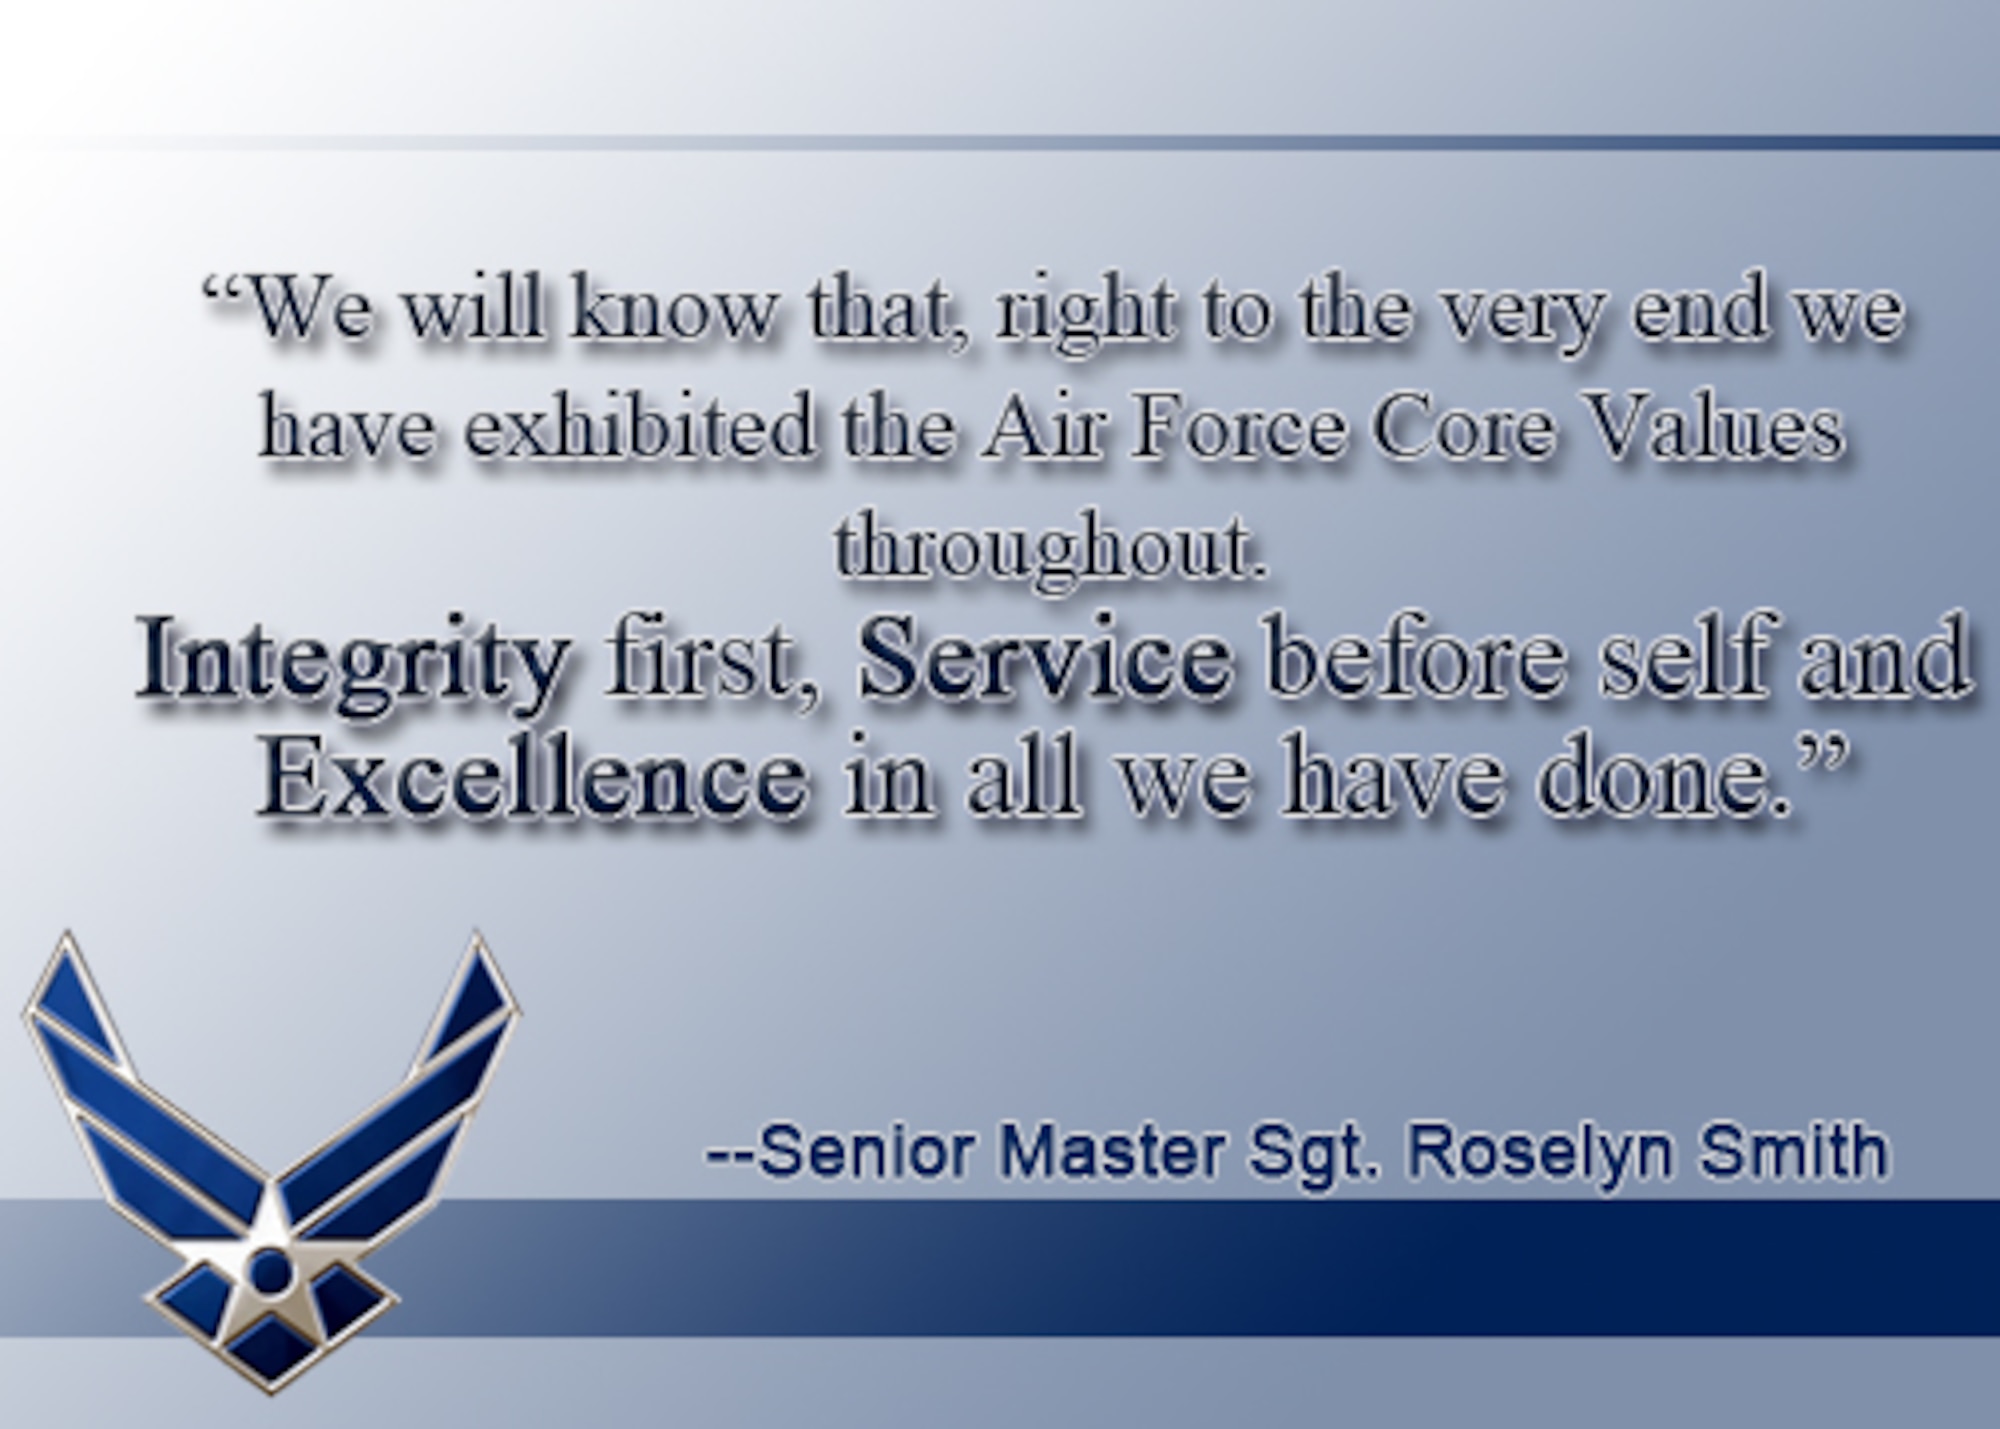 "When the last instrument gets sent away and we lock our doors for the final time, we will know that, right to the very end, we have exhibited the Air Force Core Values throughout.  Integrity first, Service before self and Excellence in all we have done." Said by Senior Master Sgt. Roselyn Smith prior to the final performance of the 555th Air Force band.  